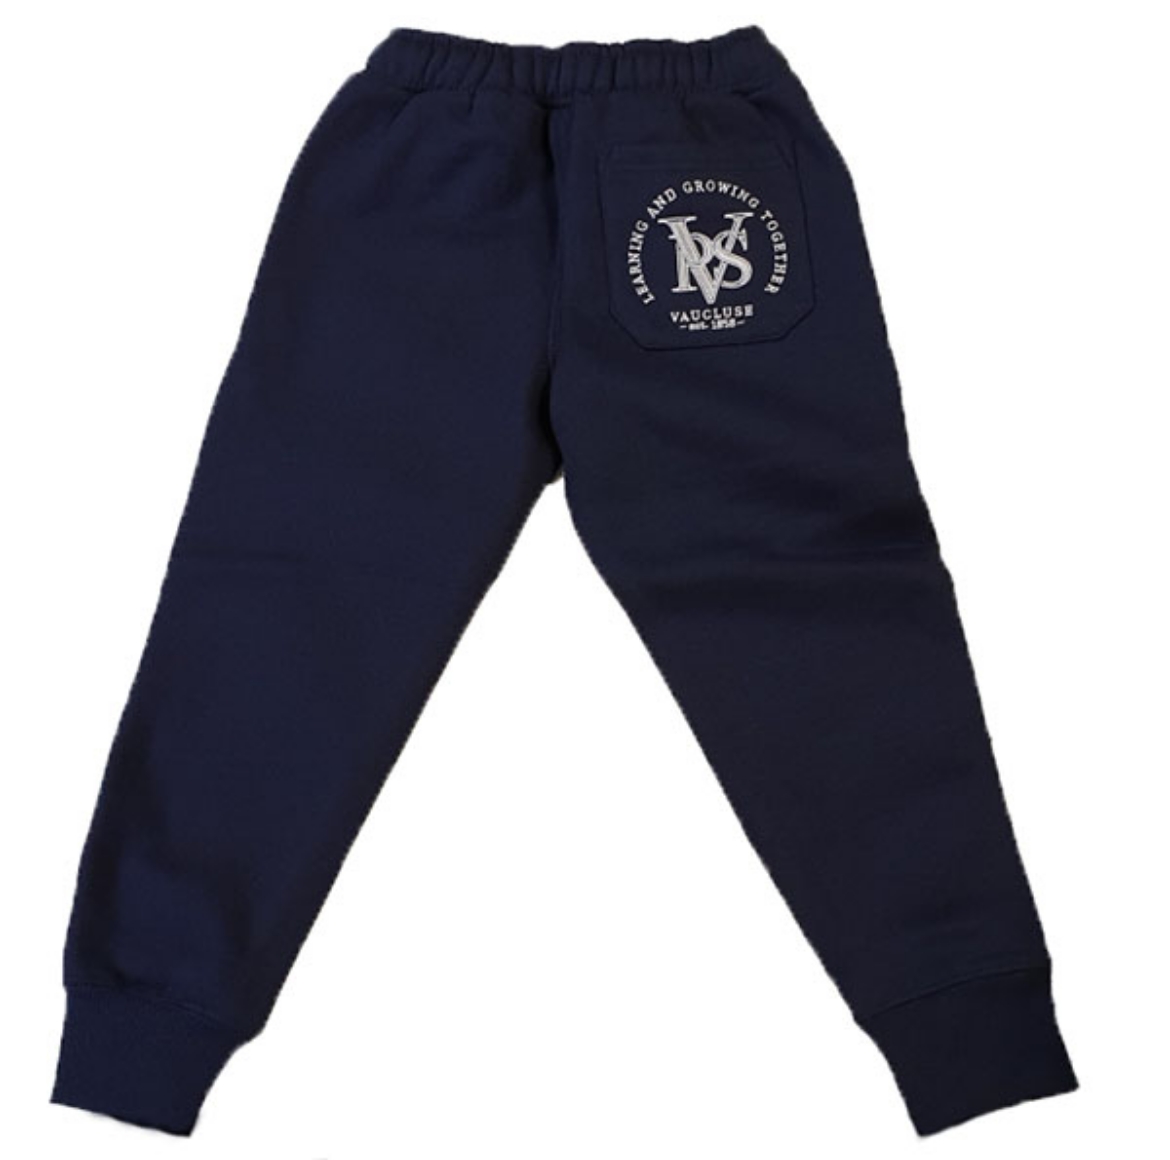 Picture of Vaucluse Track Pants - Navy w/logo on back pocket